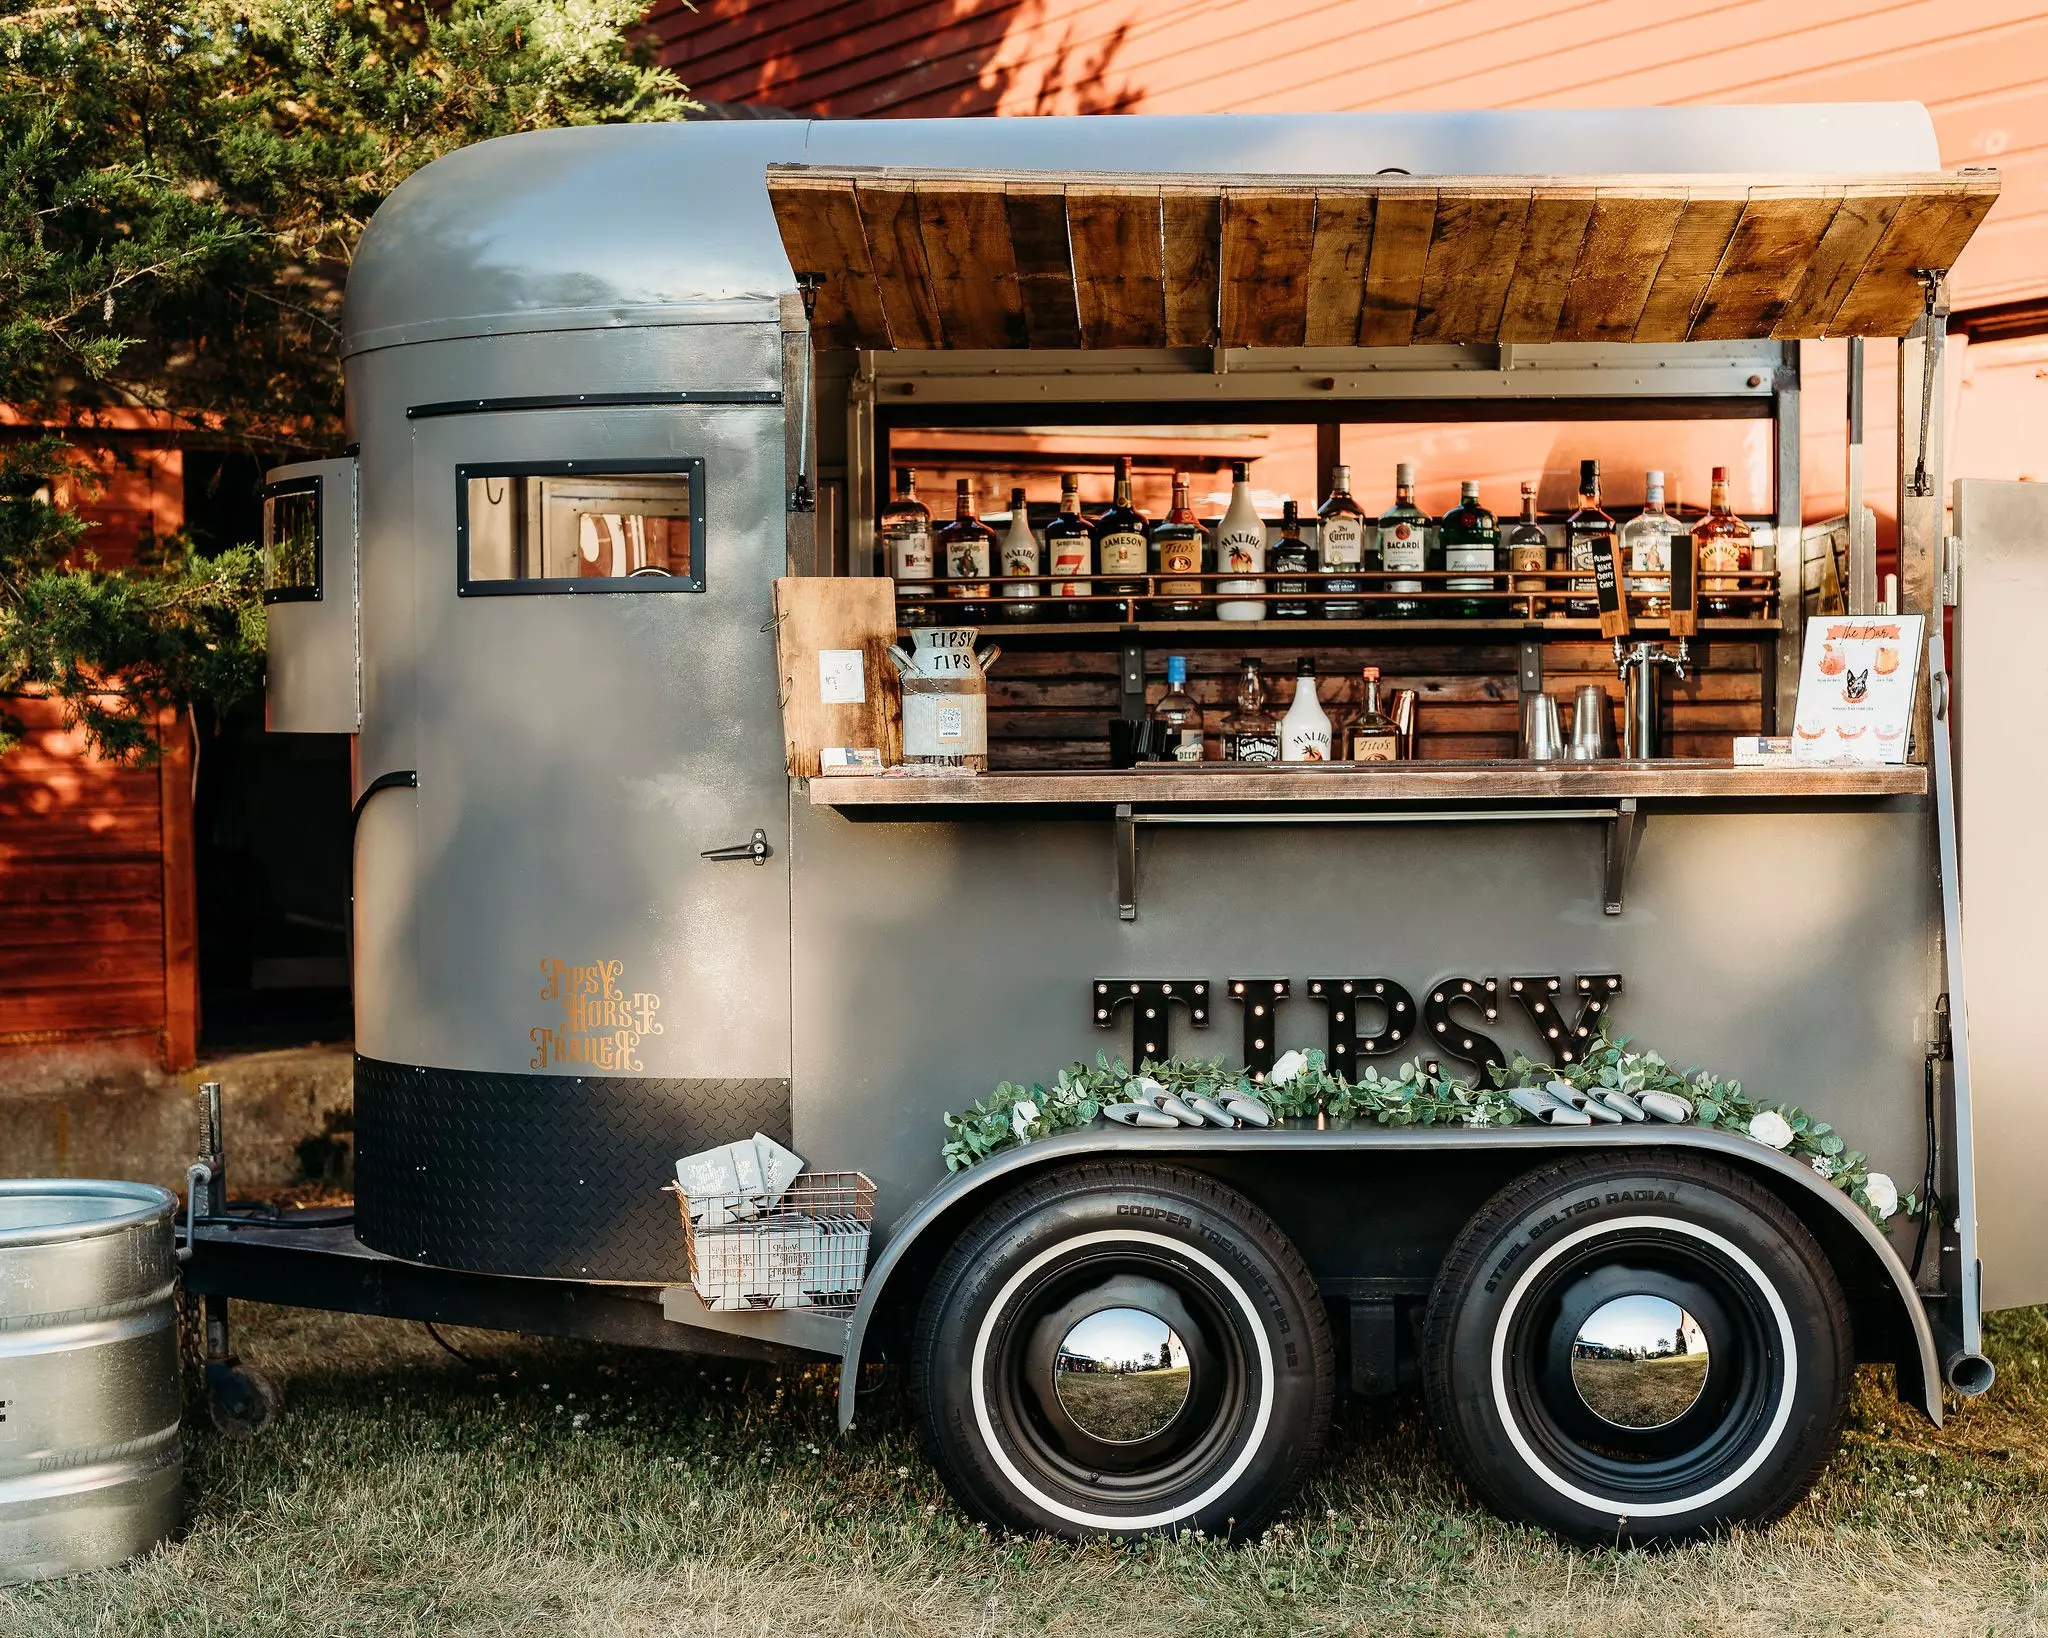 Jazz up your next party by renting a mobile bar in NJ